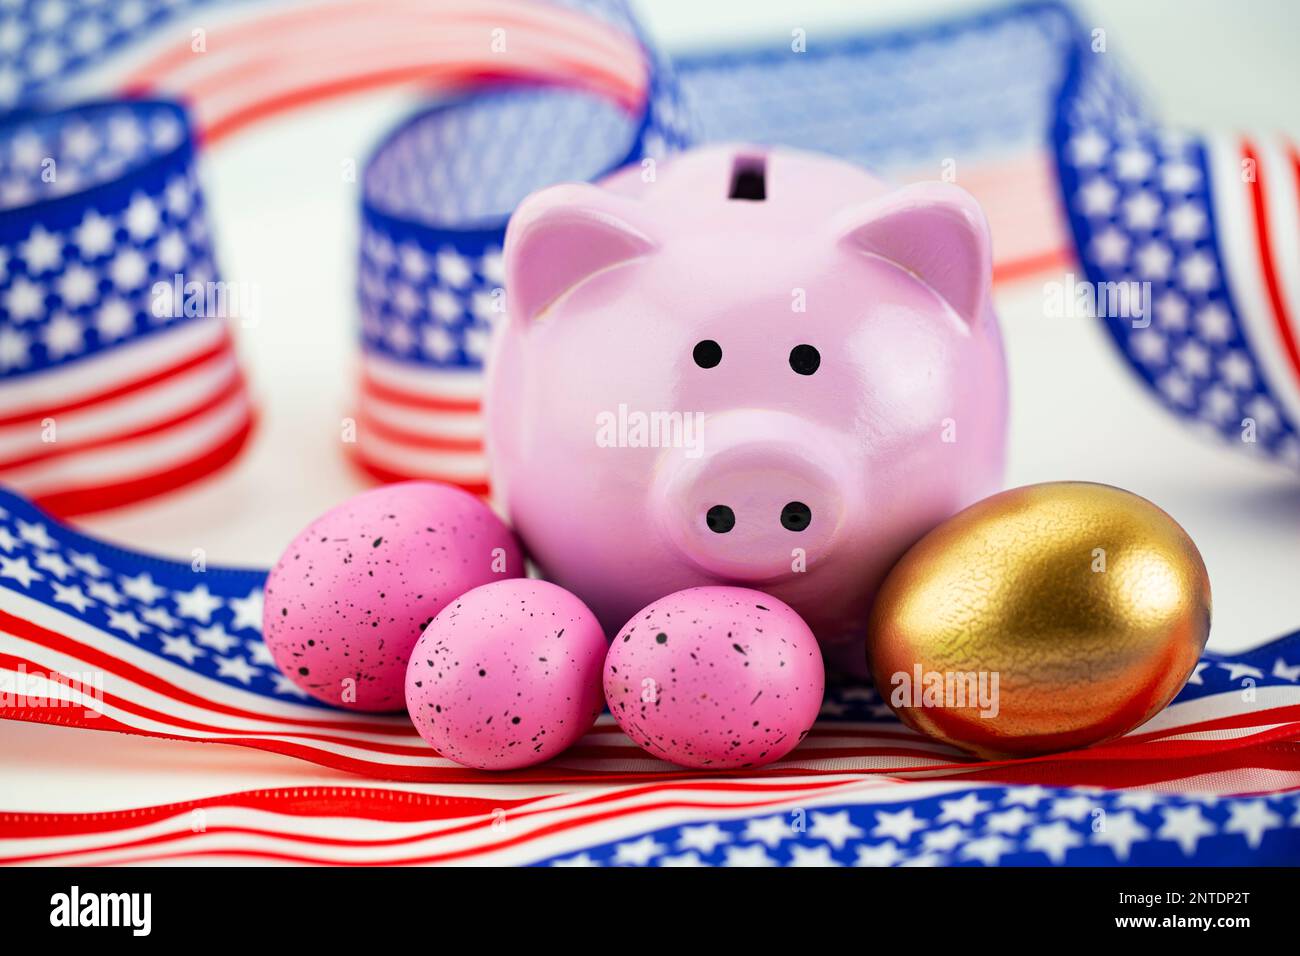 American stars and stripes, red, white, and blue surround feminine  bank accented by gold egg and three, pink eggs support women's success Stock Photo